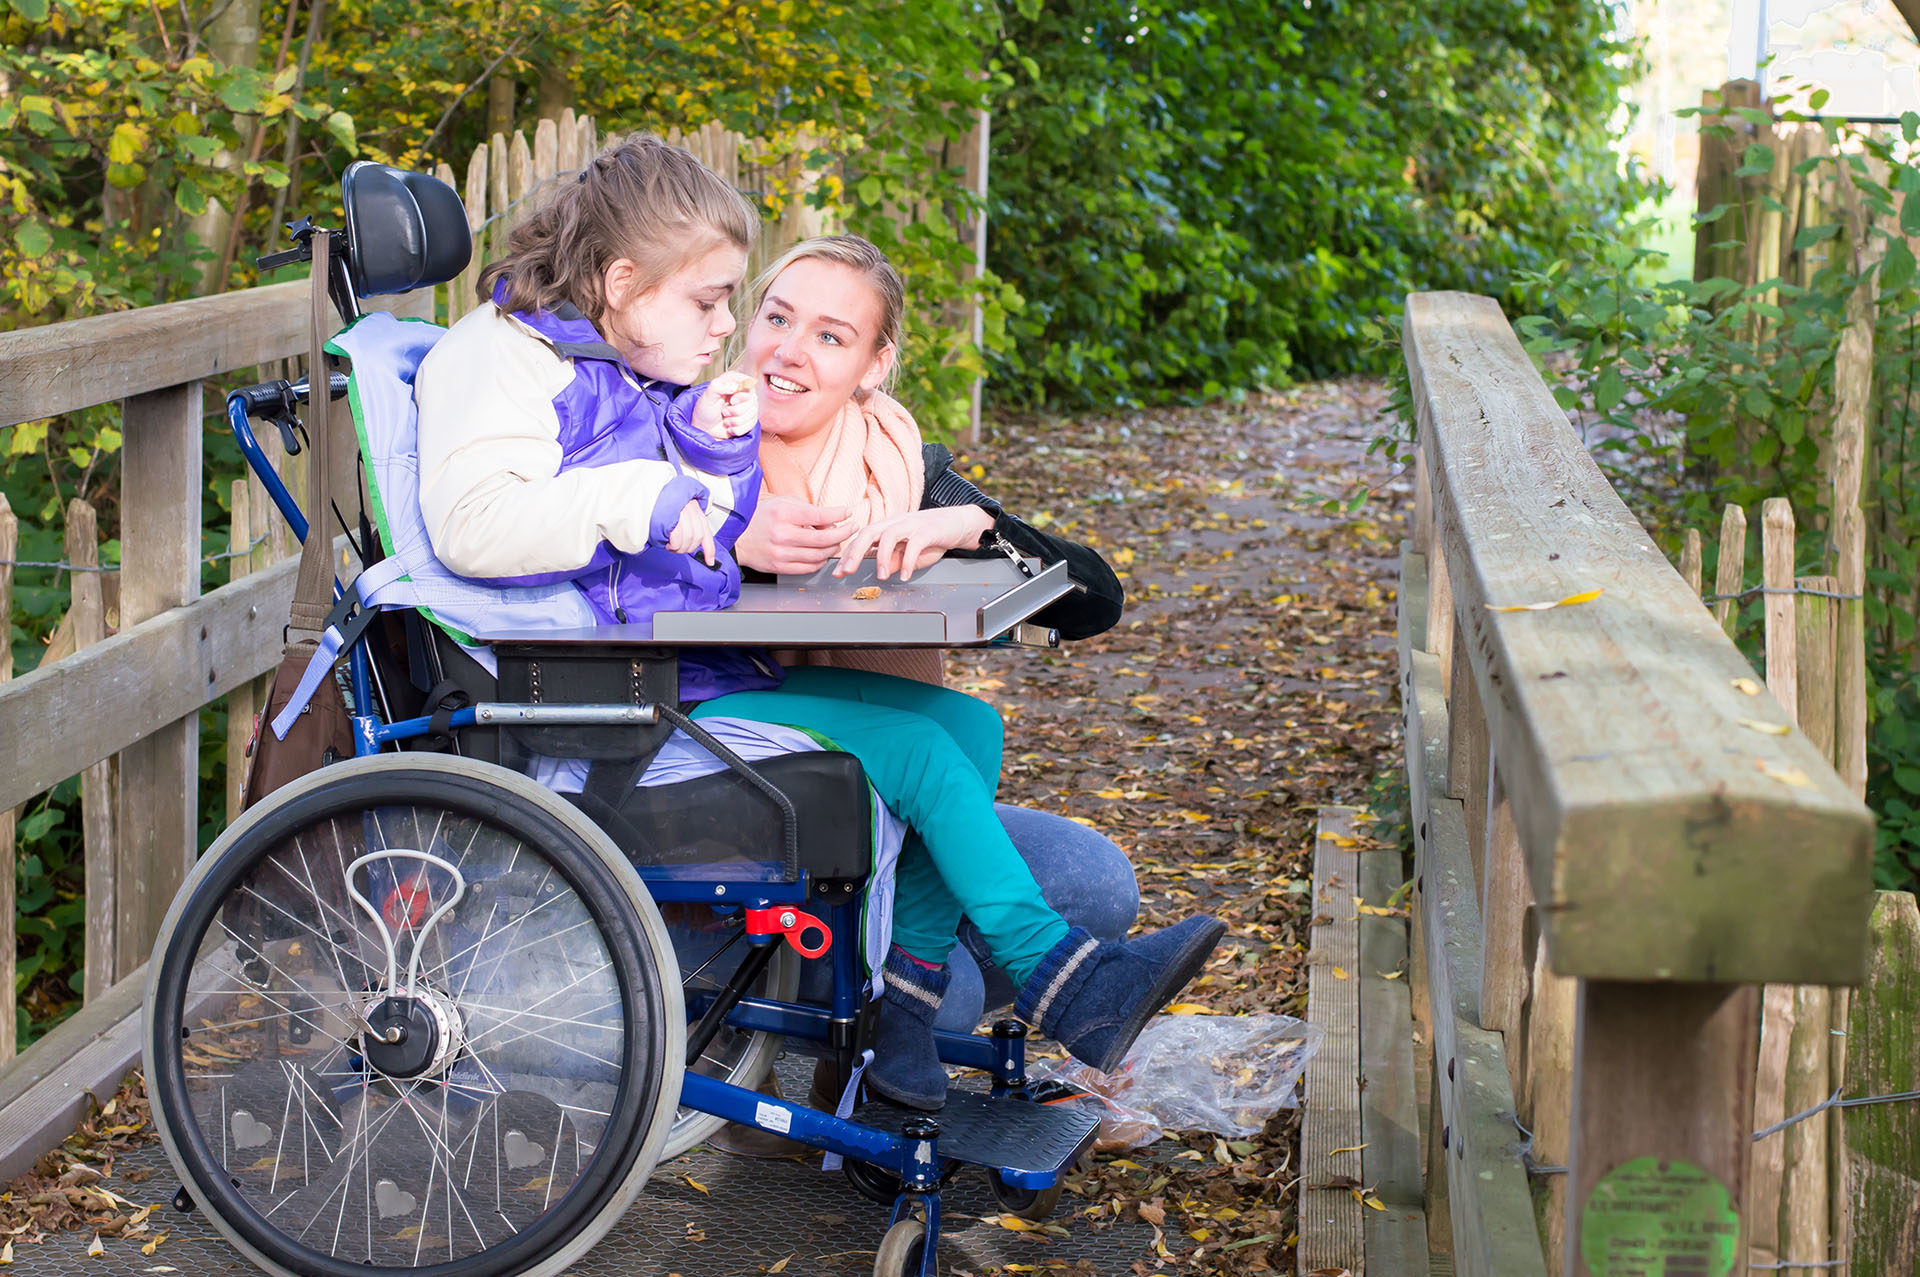 Benefits for children with disabilities or additional needs